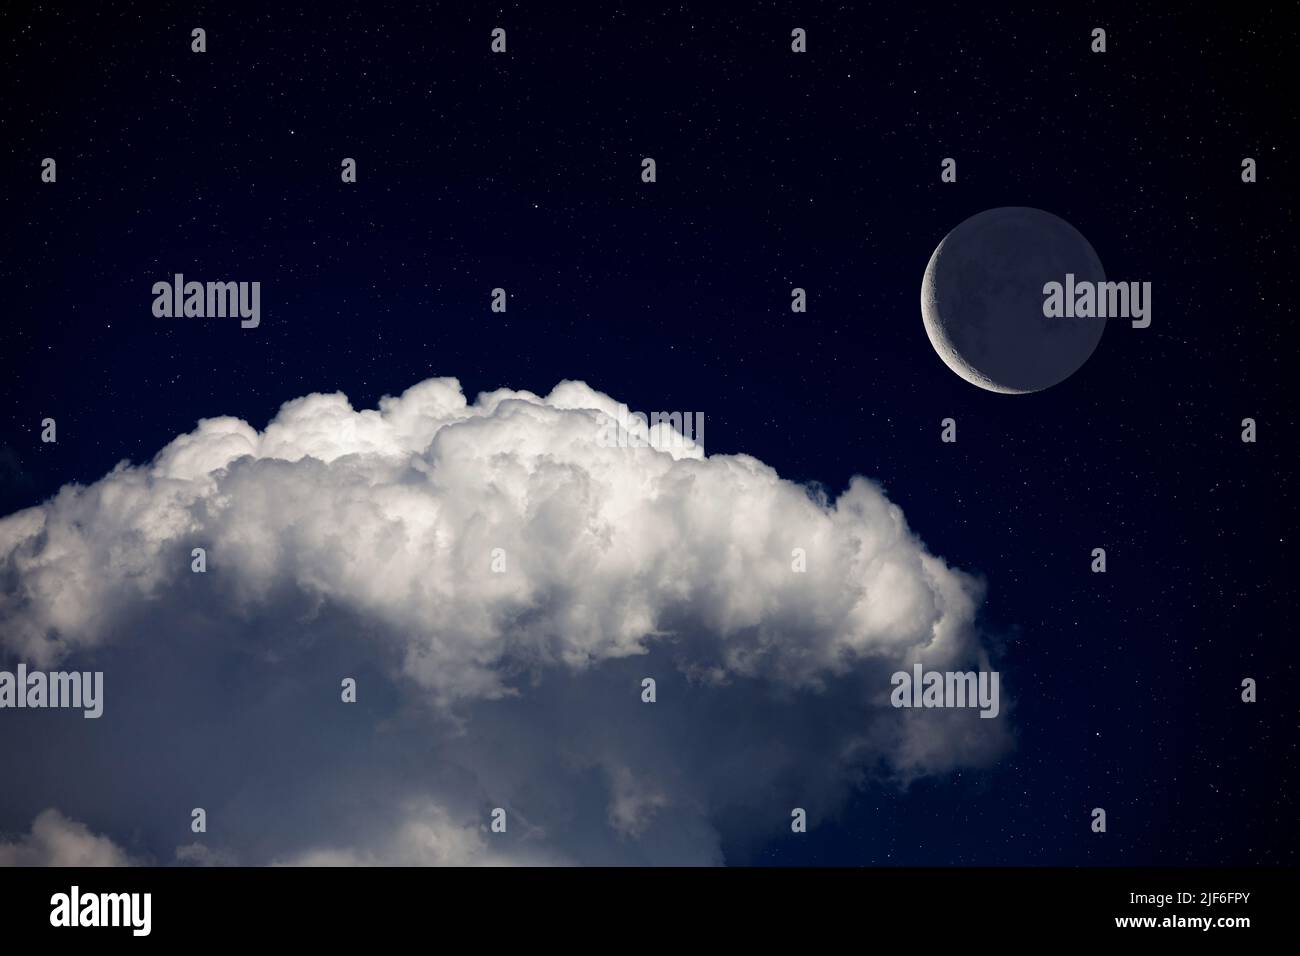 Fantasy night landscape, waning crescent moon surrounded by stars above cloud. Daydreaming image. Stock Photo